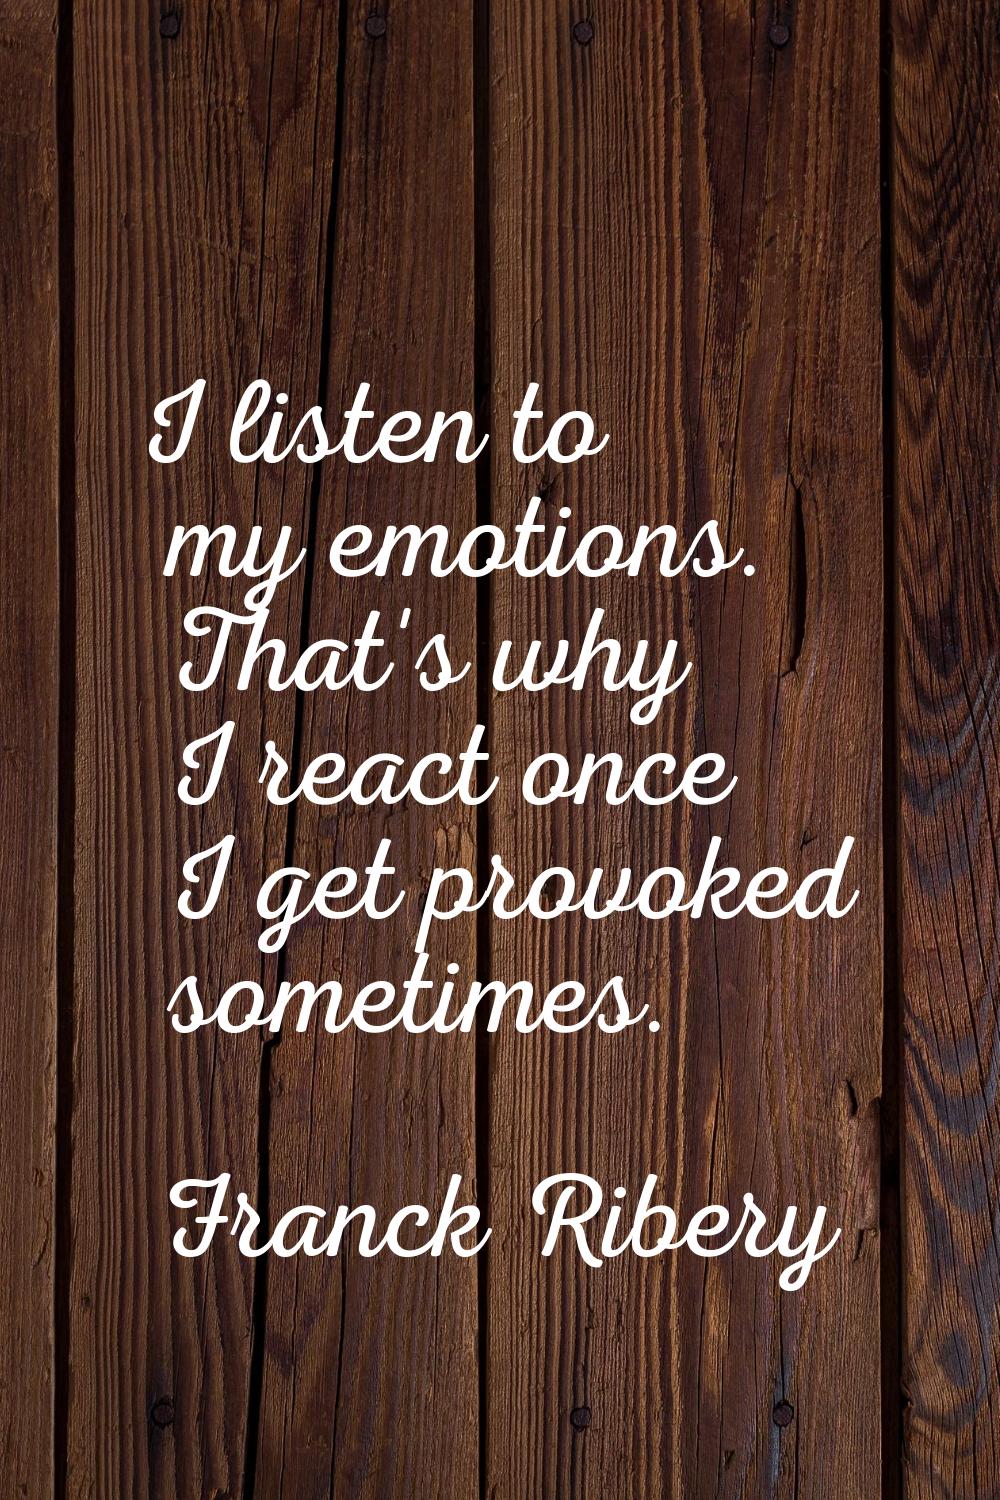 I listen to my emotions. That's why I react once I get provoked sometimes.